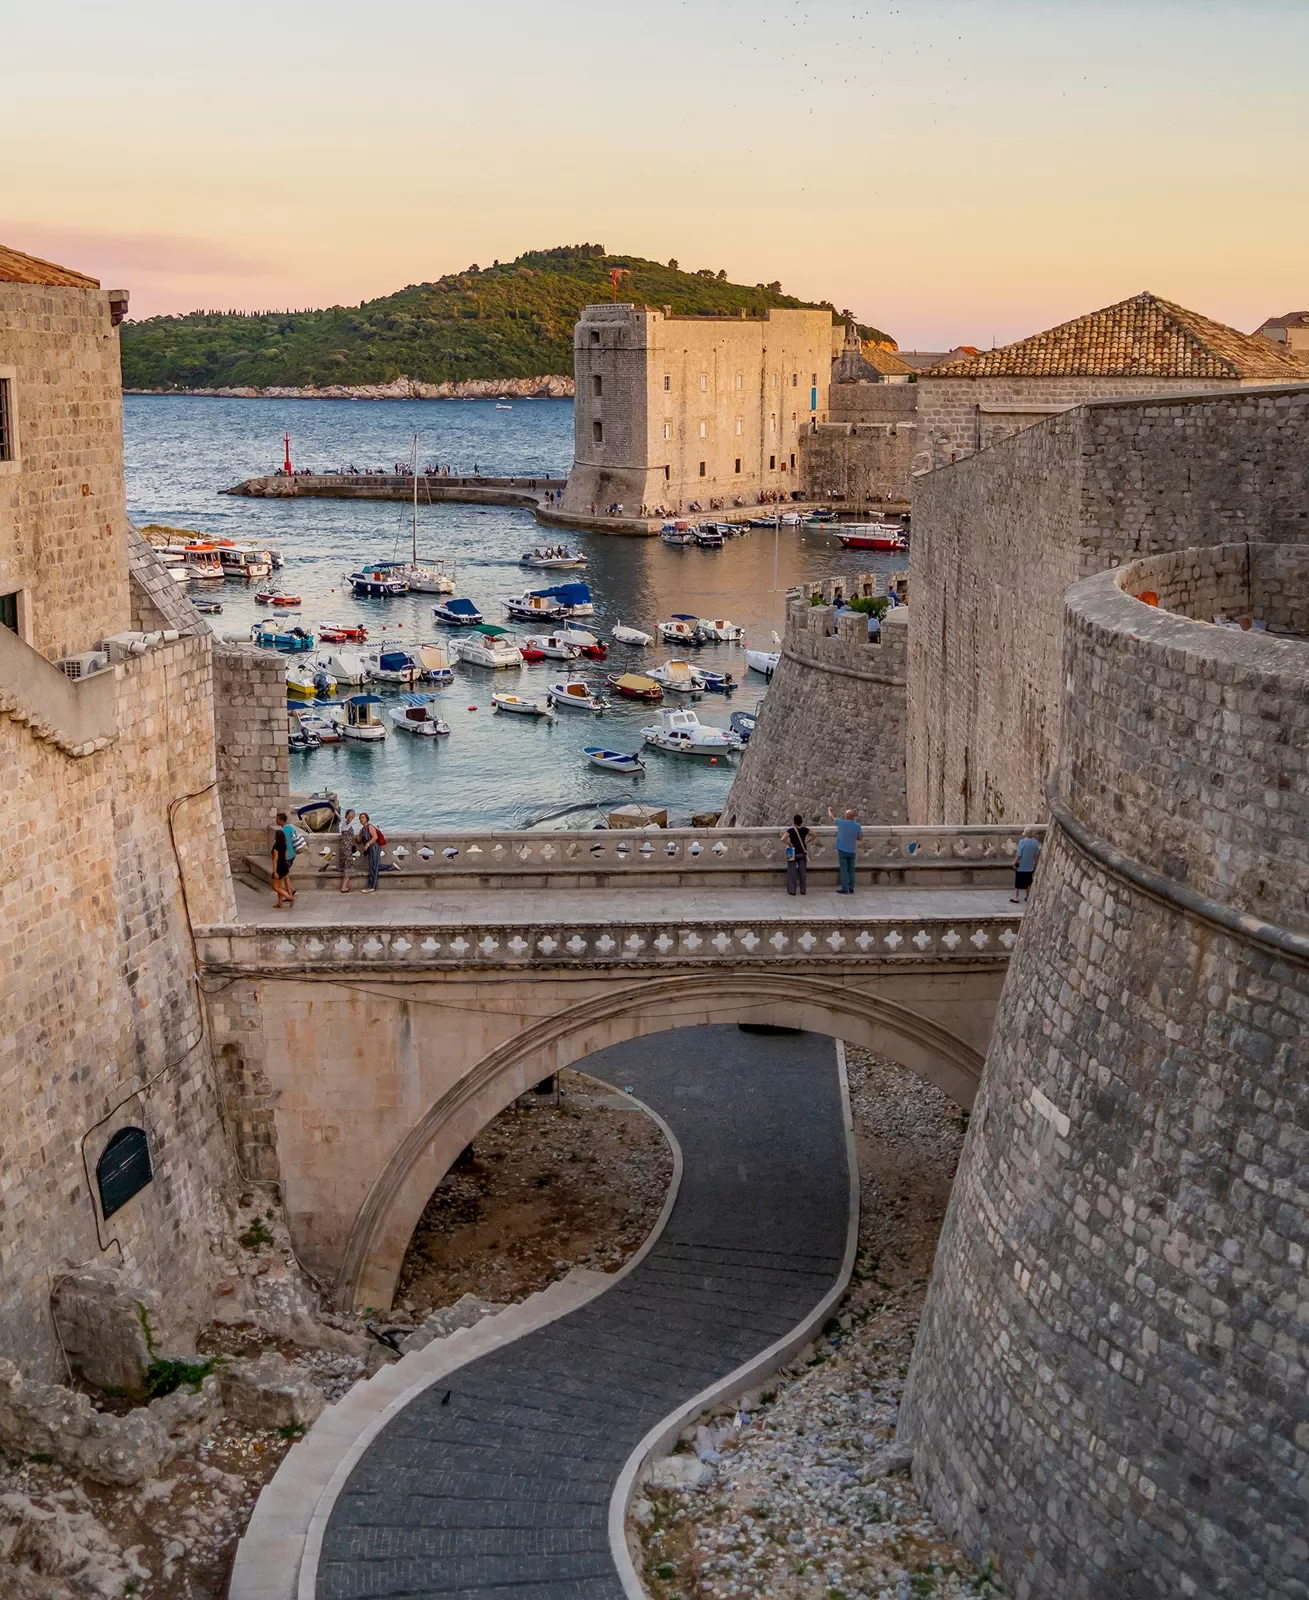 Walled outskirts of Dubrovnik during sunset.